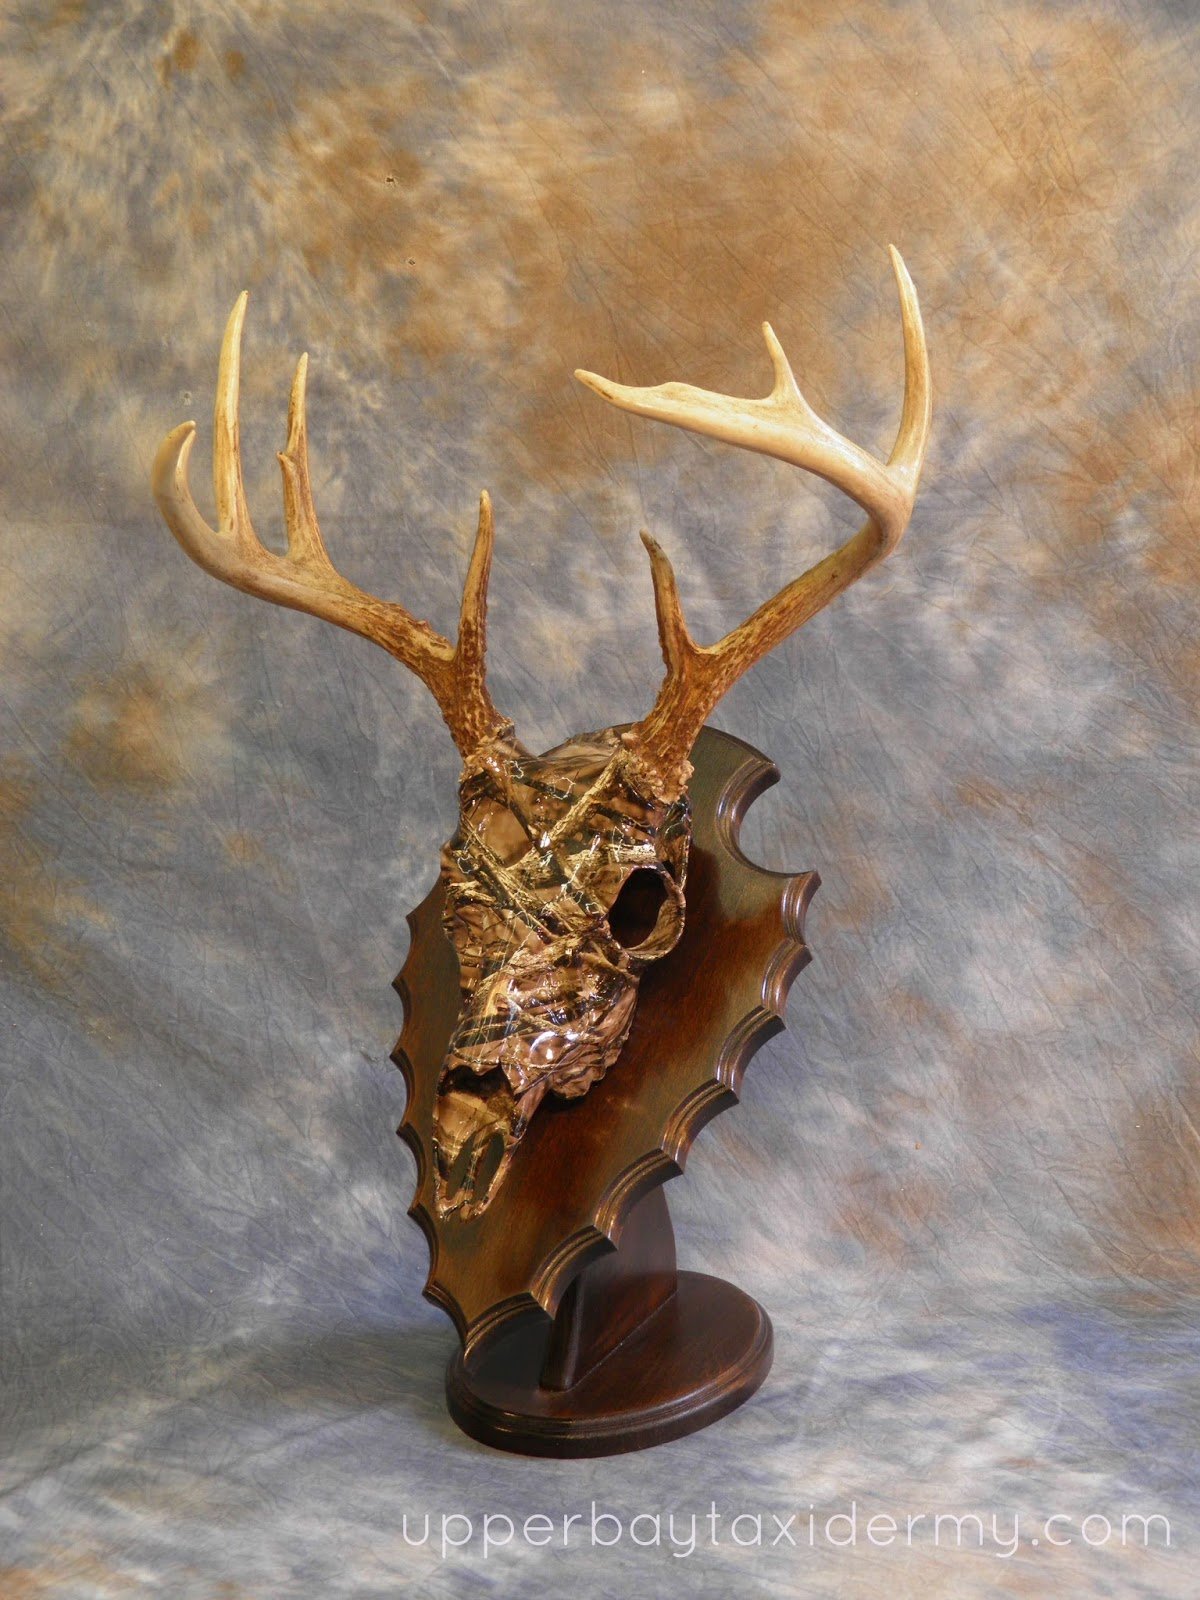 Whitetail European Skull Mount, Hydro-dipped in Timber Style Camo Pattern, on Angled Arrowhead style panel for Table Display (Copy)